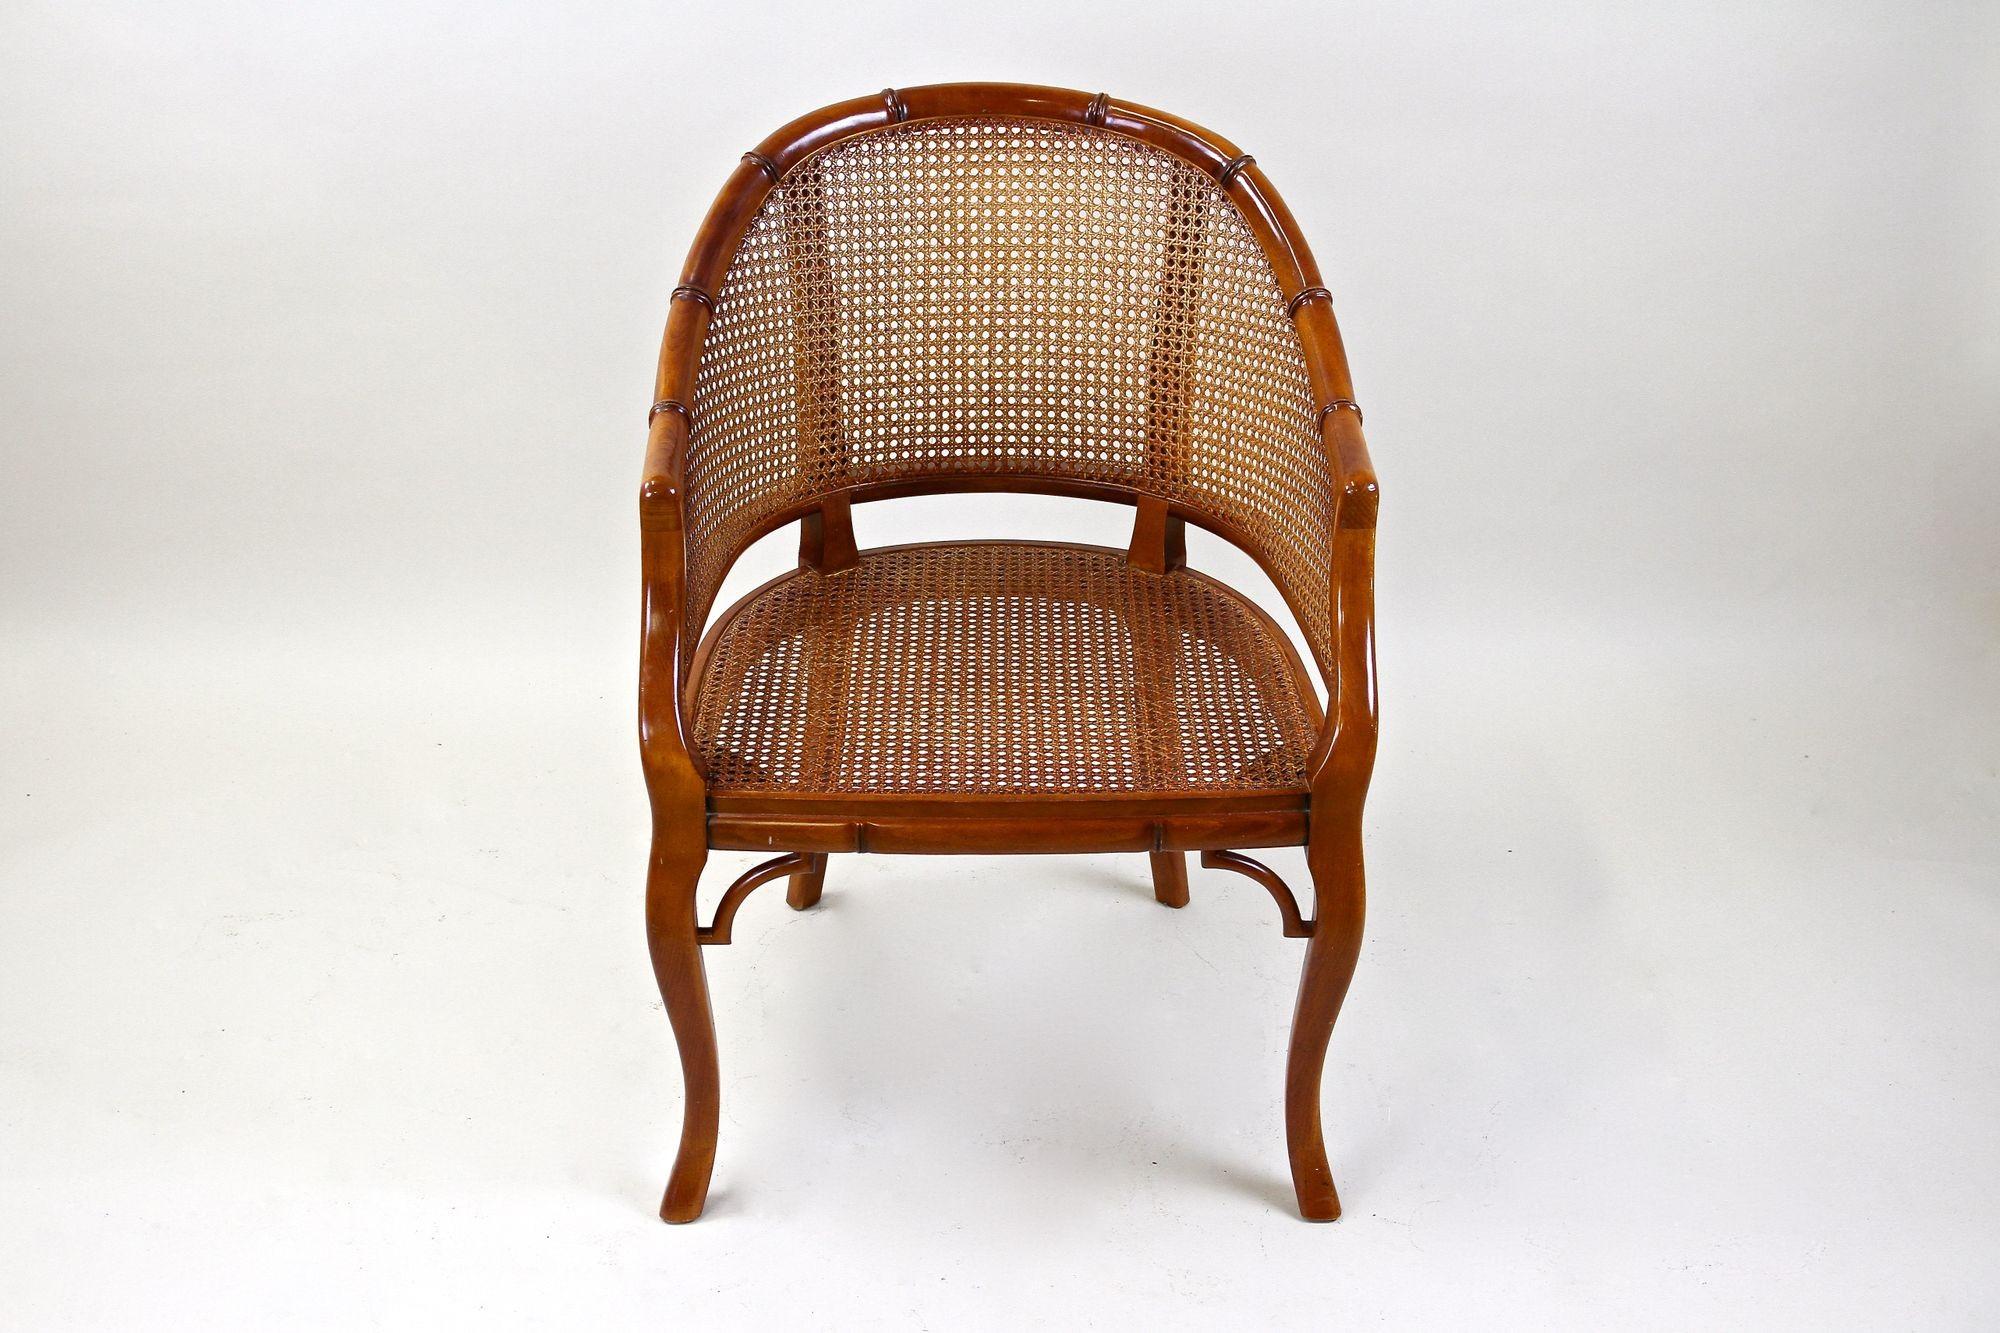 Spectacular Mid-century faux-bamboo caned barrel armchair from the 1970s in France made by the famous company of Grange, a very traditional French furniture company established 1904 in Monts du Lyonnais by Joseph Grange. This stunning late